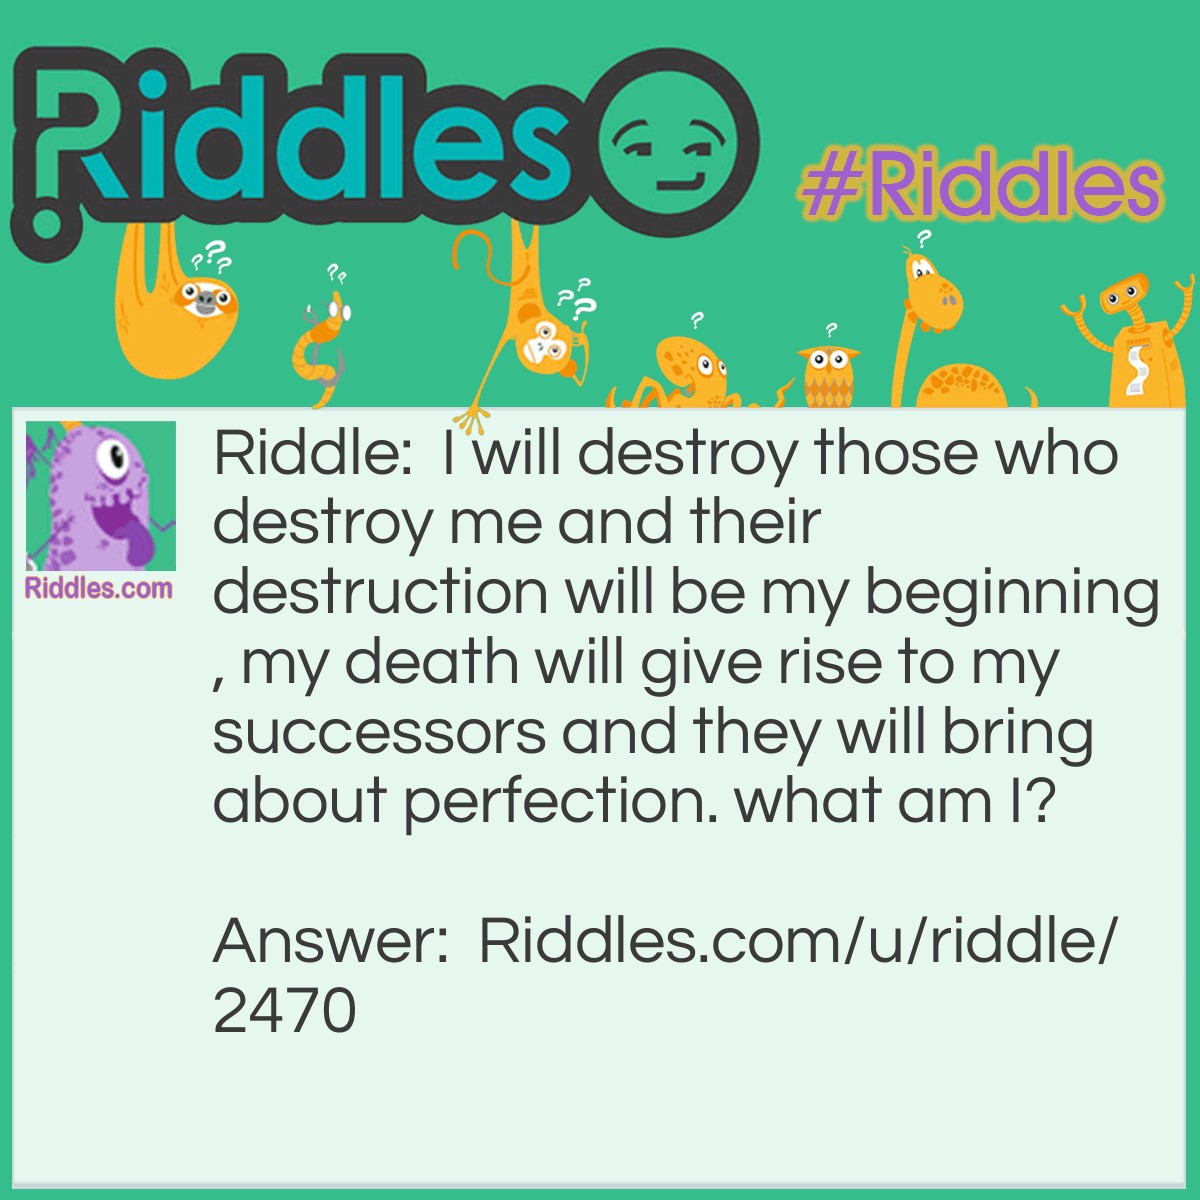 Riddle: I will destroy those who destroy me and their destruction will be my beginning, my death will give rise to my successors and they will bring about perfection. what am I? Answer: Disease.